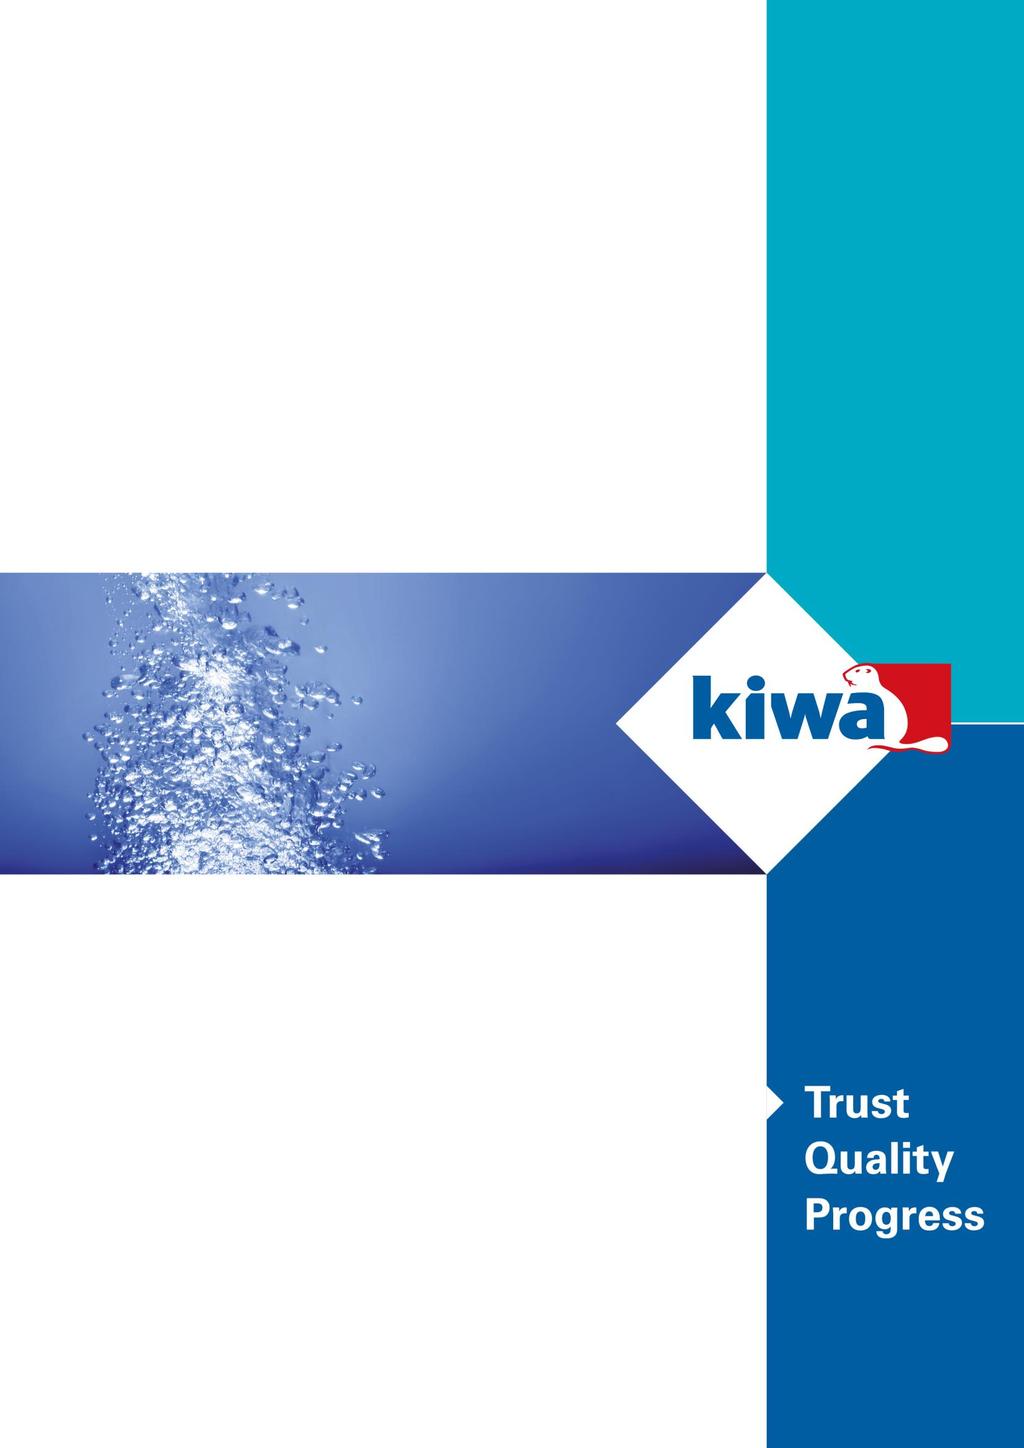 BRL K14022 Date 2018-01-12 for the Kiwa product certificate